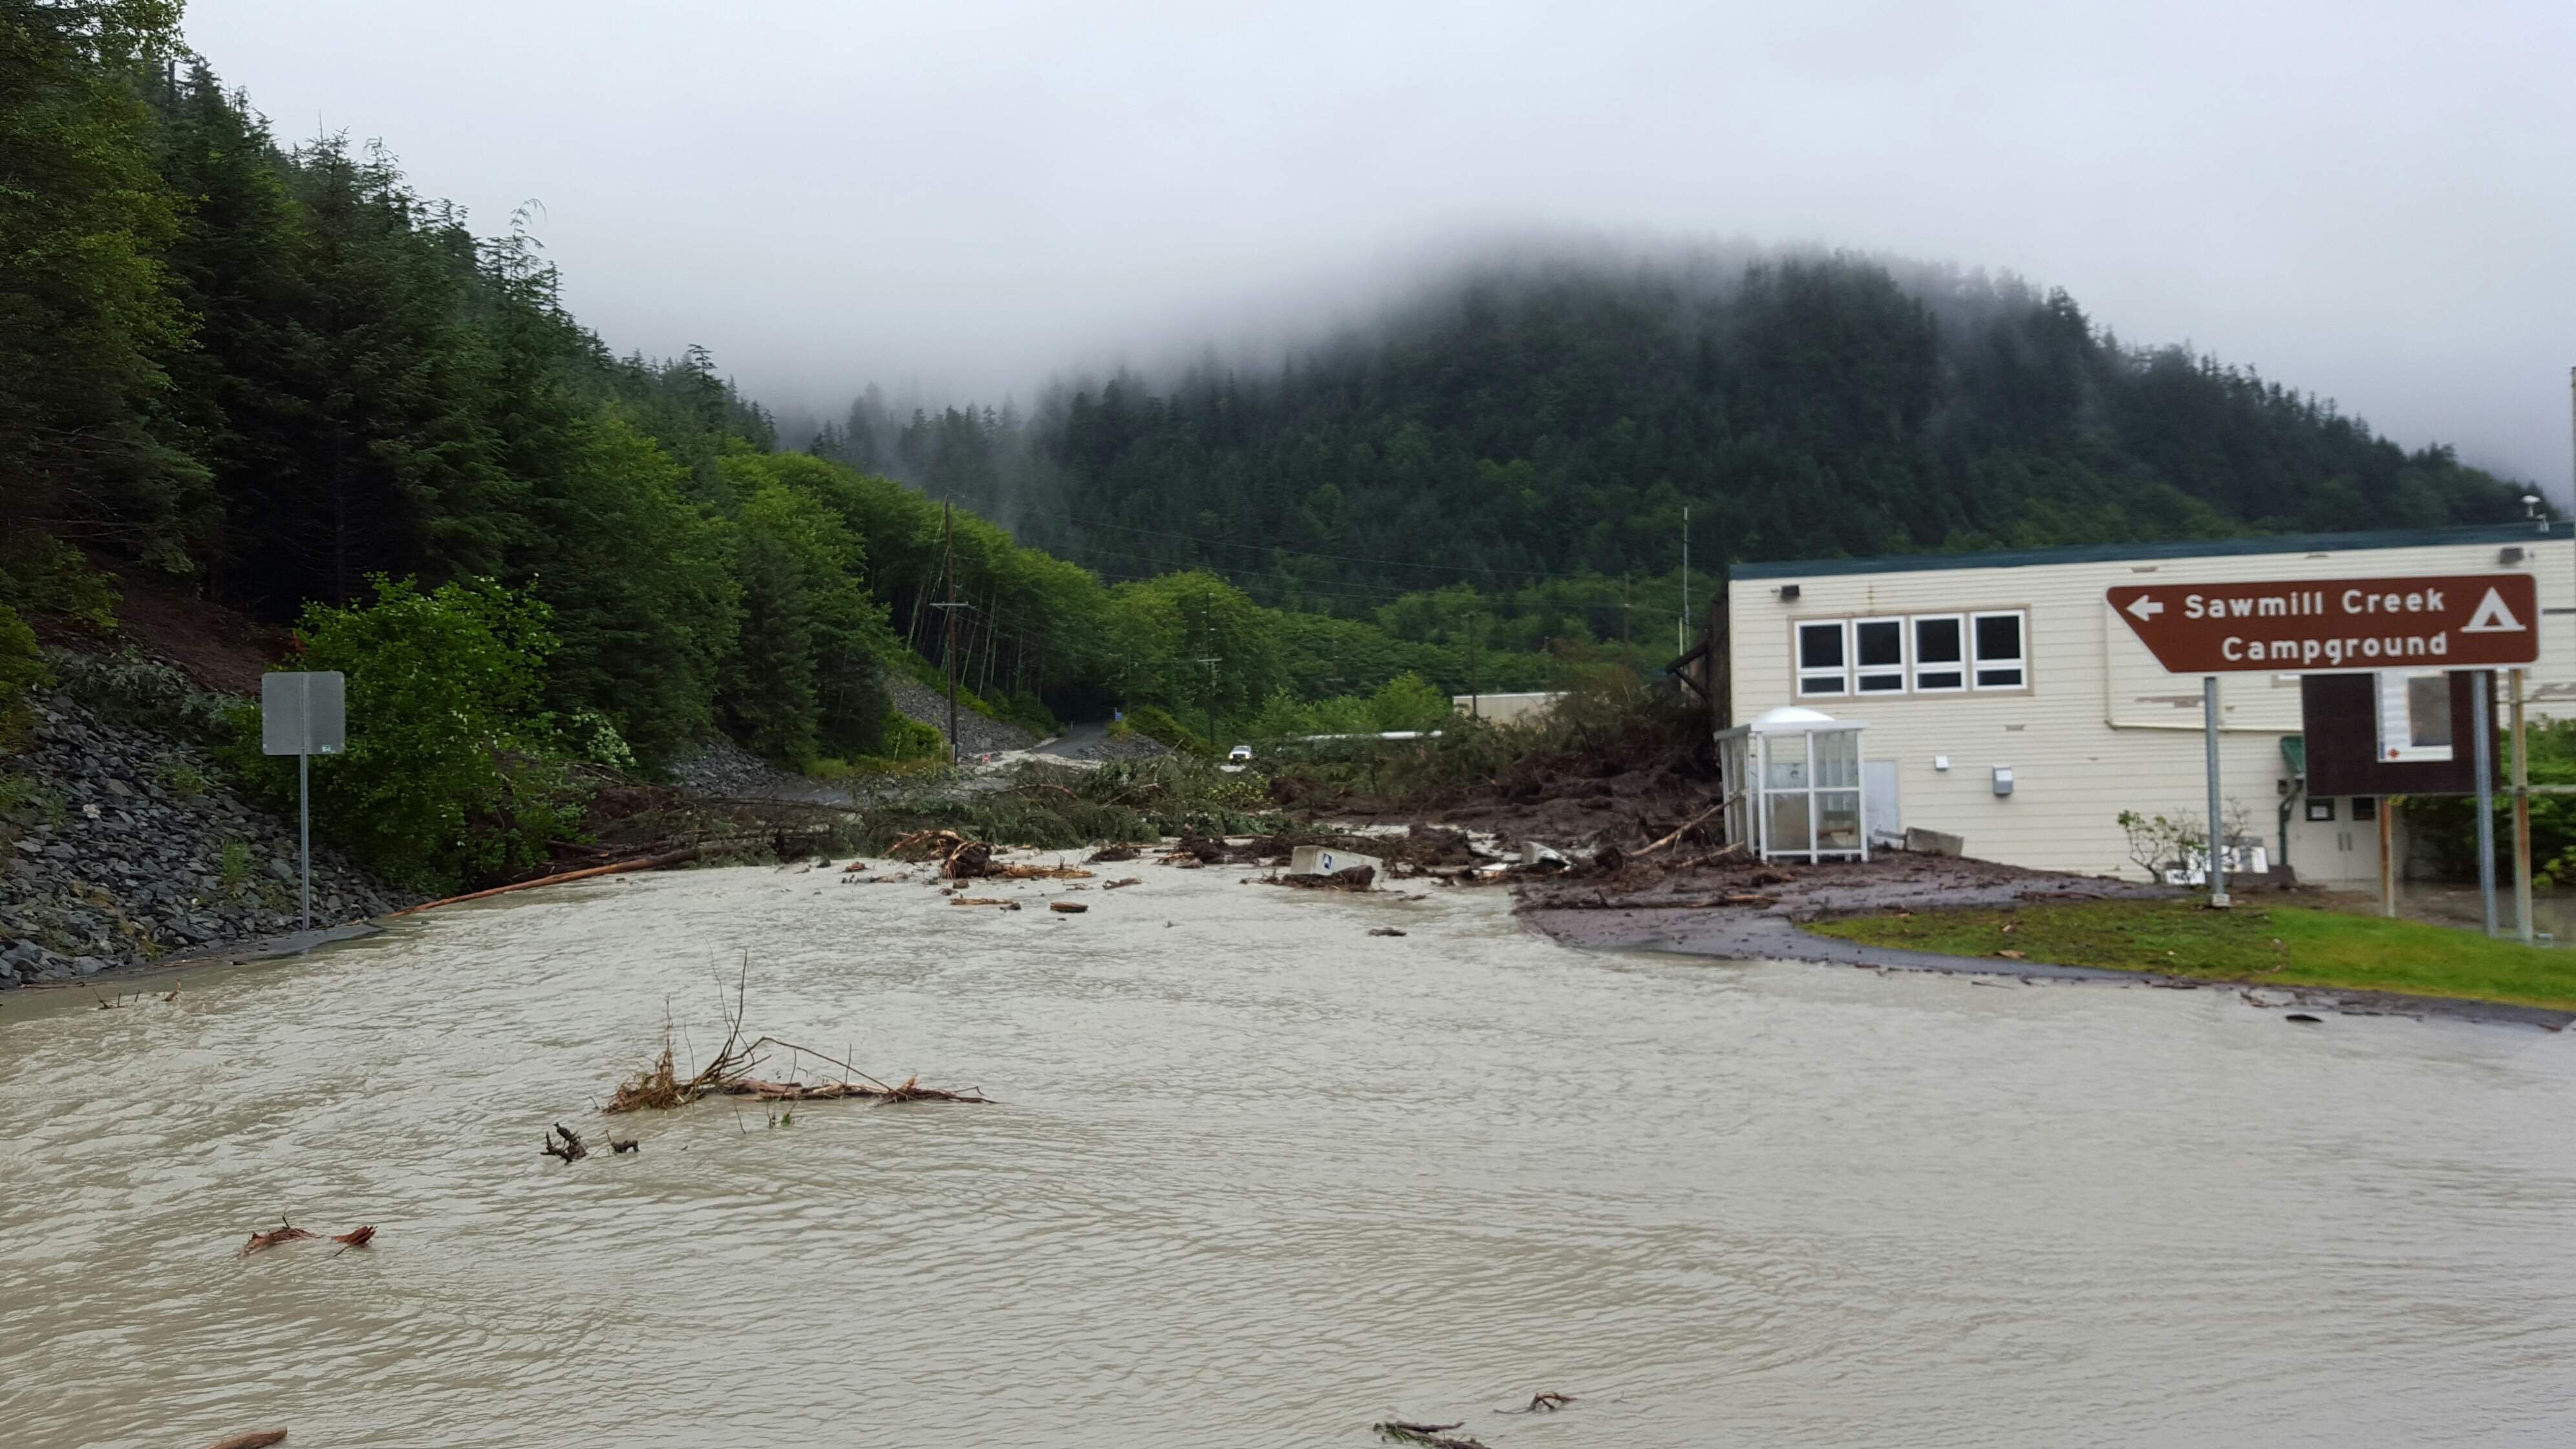 Three people were unaccounted for Tuesday, August 18, 2015, after a landslide struck a new-home development outside a city in the Alaska panhandle, authorities said. An employee of the city of Sitka and three contractors were working in the housing development when heavy rains caused the landslide, police Chief Sheldon Schmitt said.